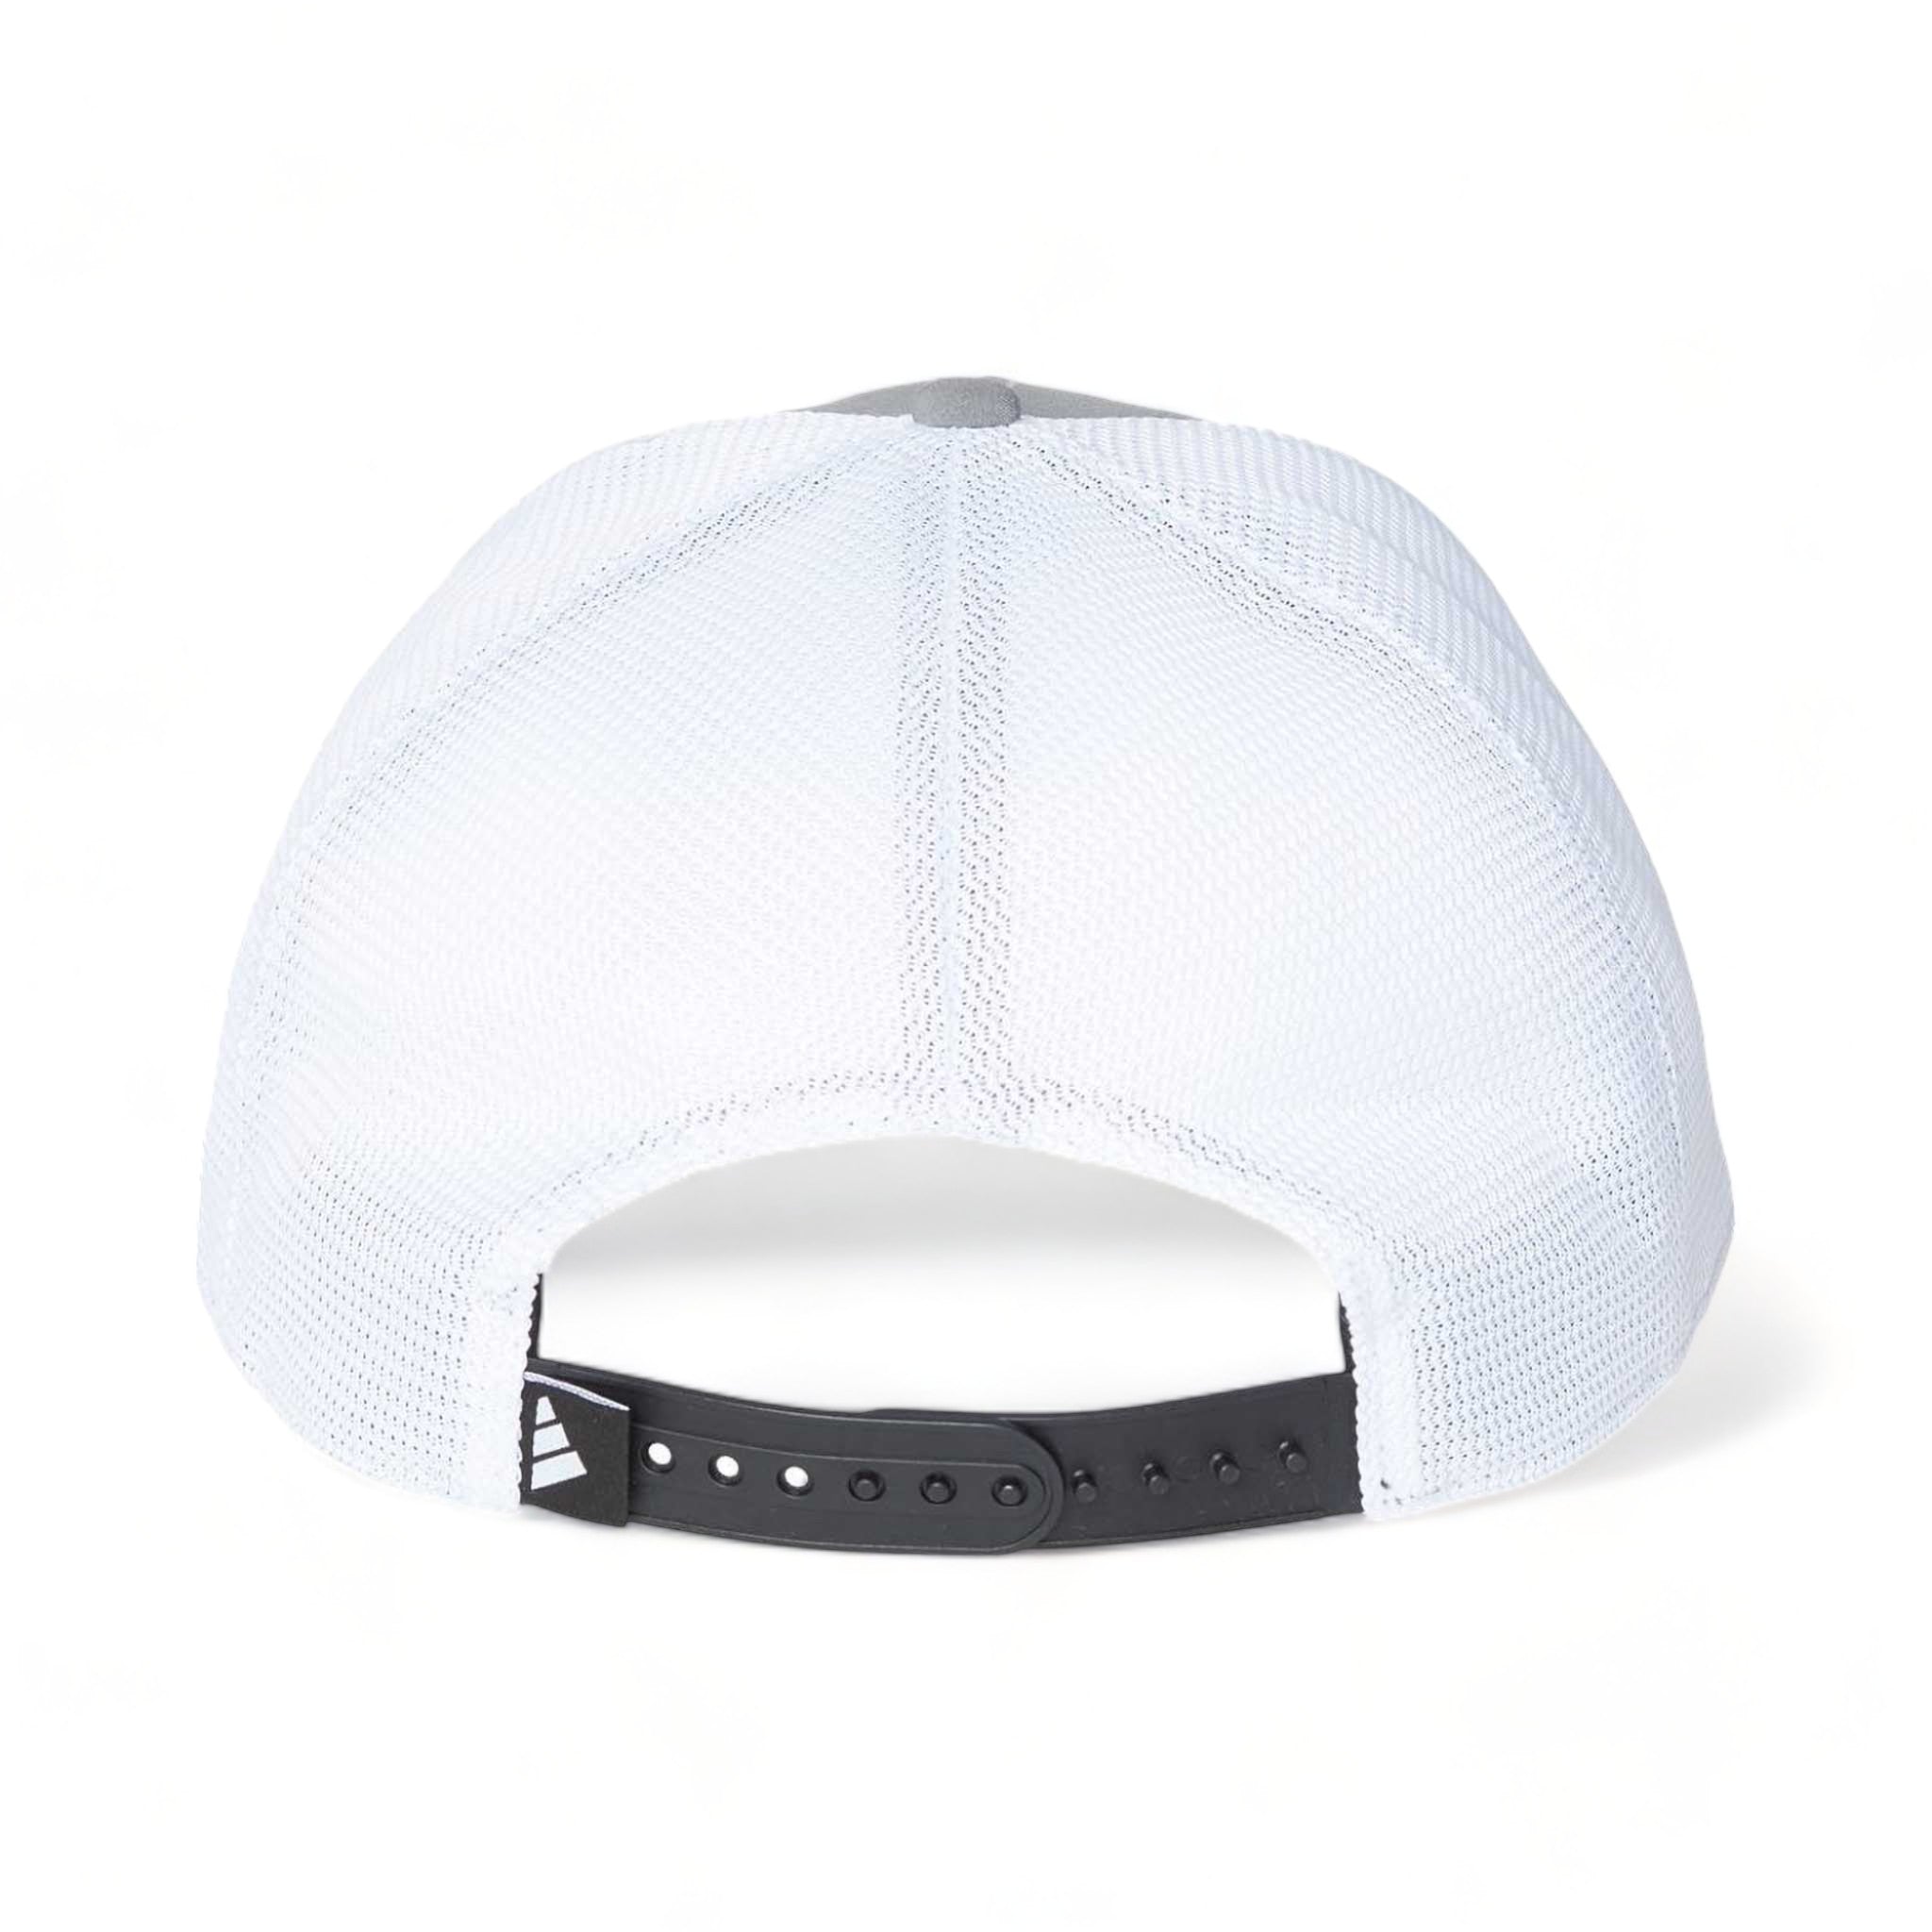 Back view of Adidas A627S custom hat in grey three